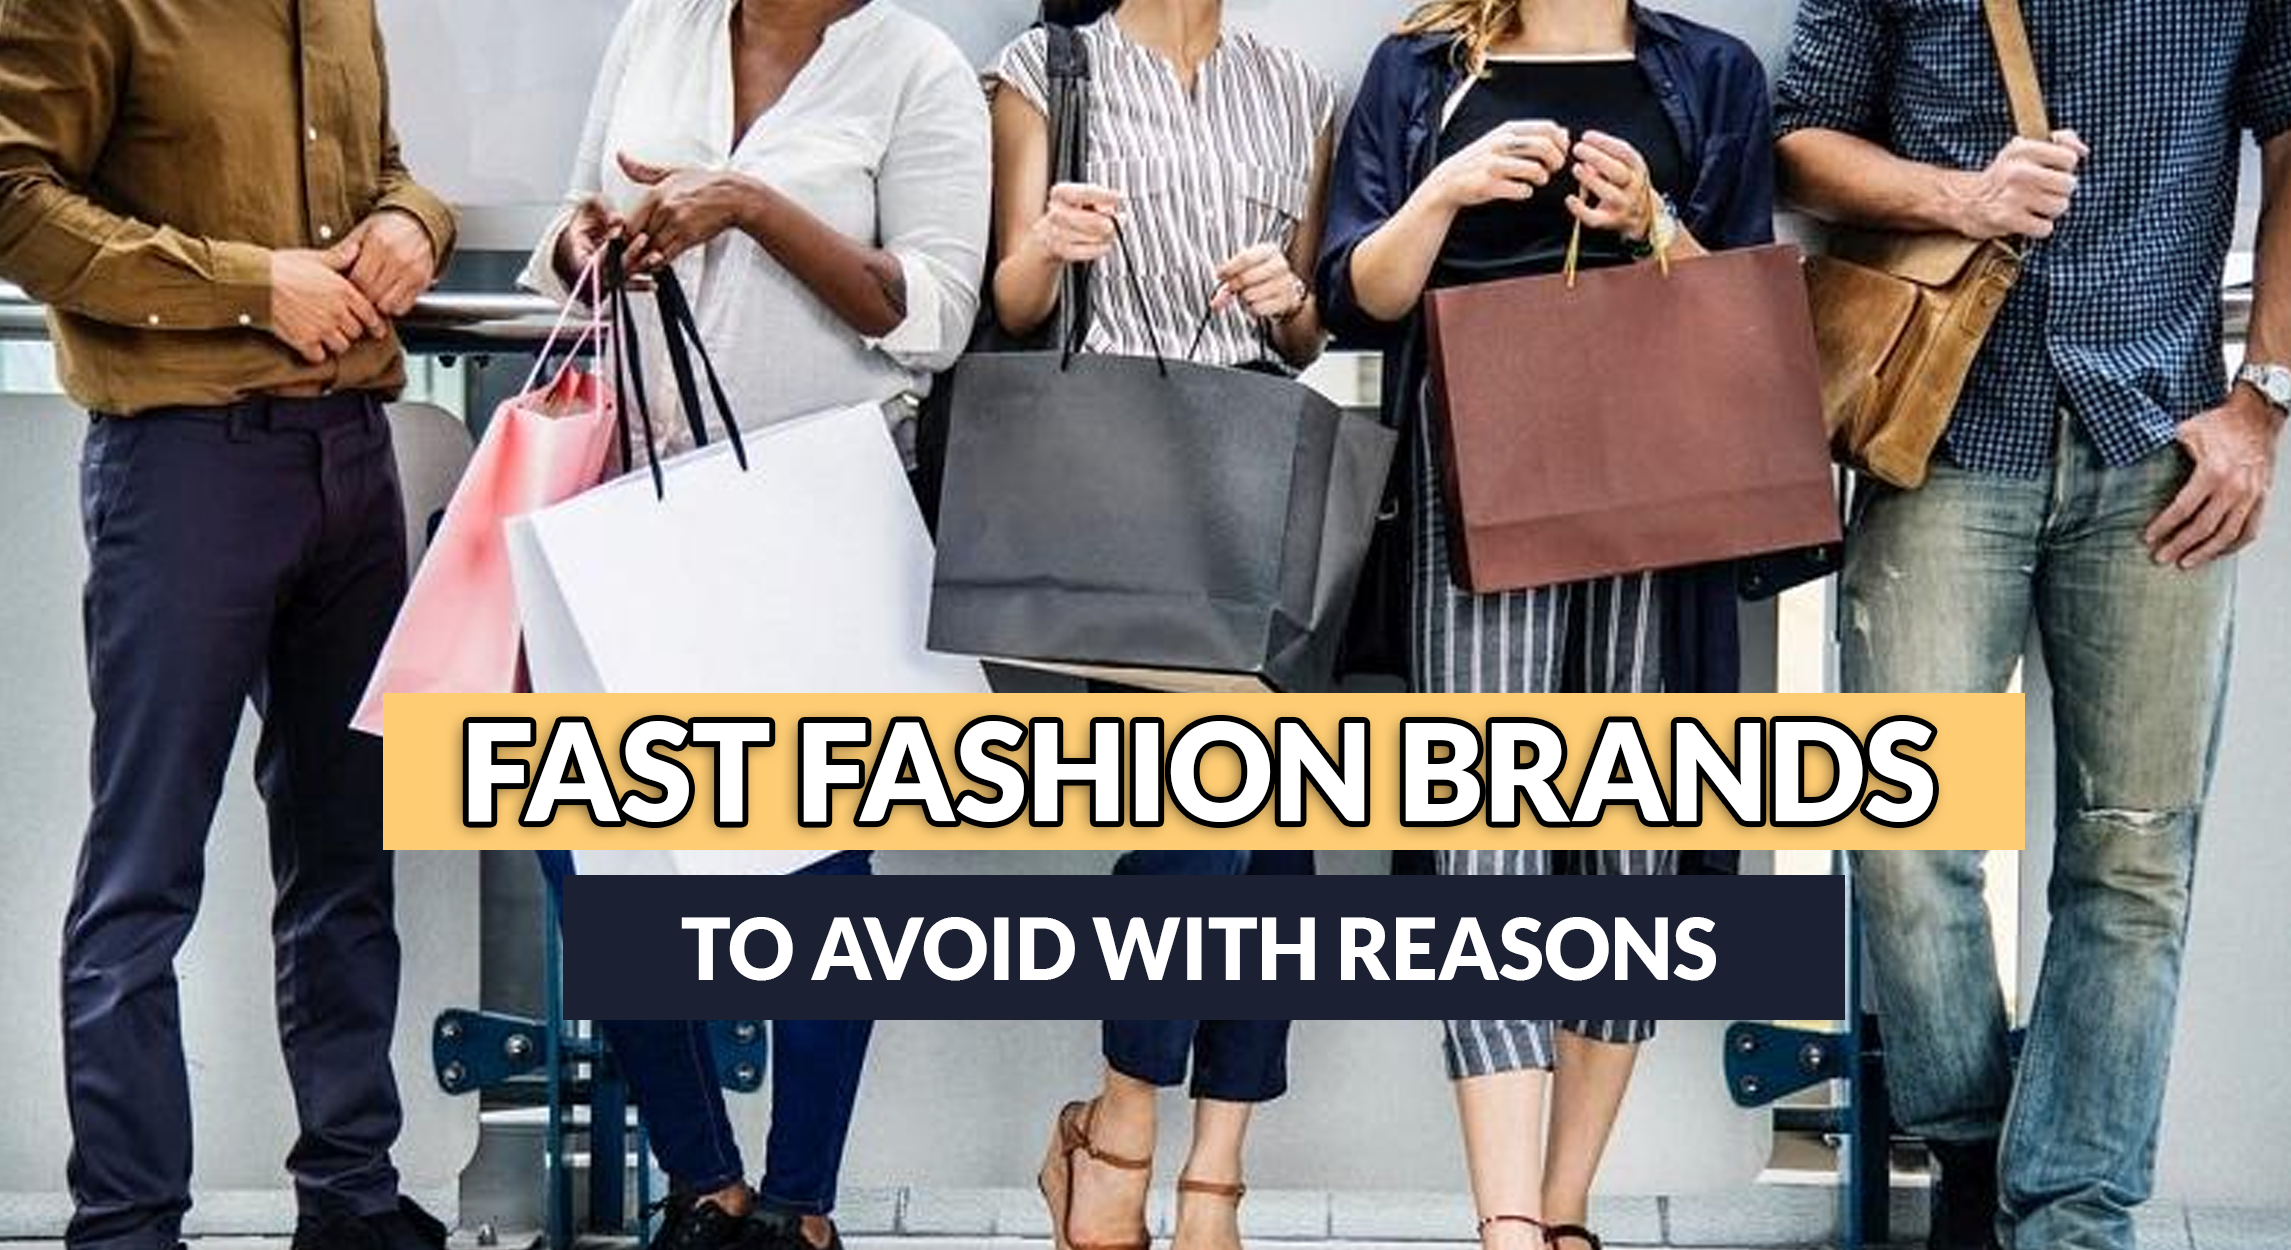 Fast Fashion Brands To Avoid With Reasons